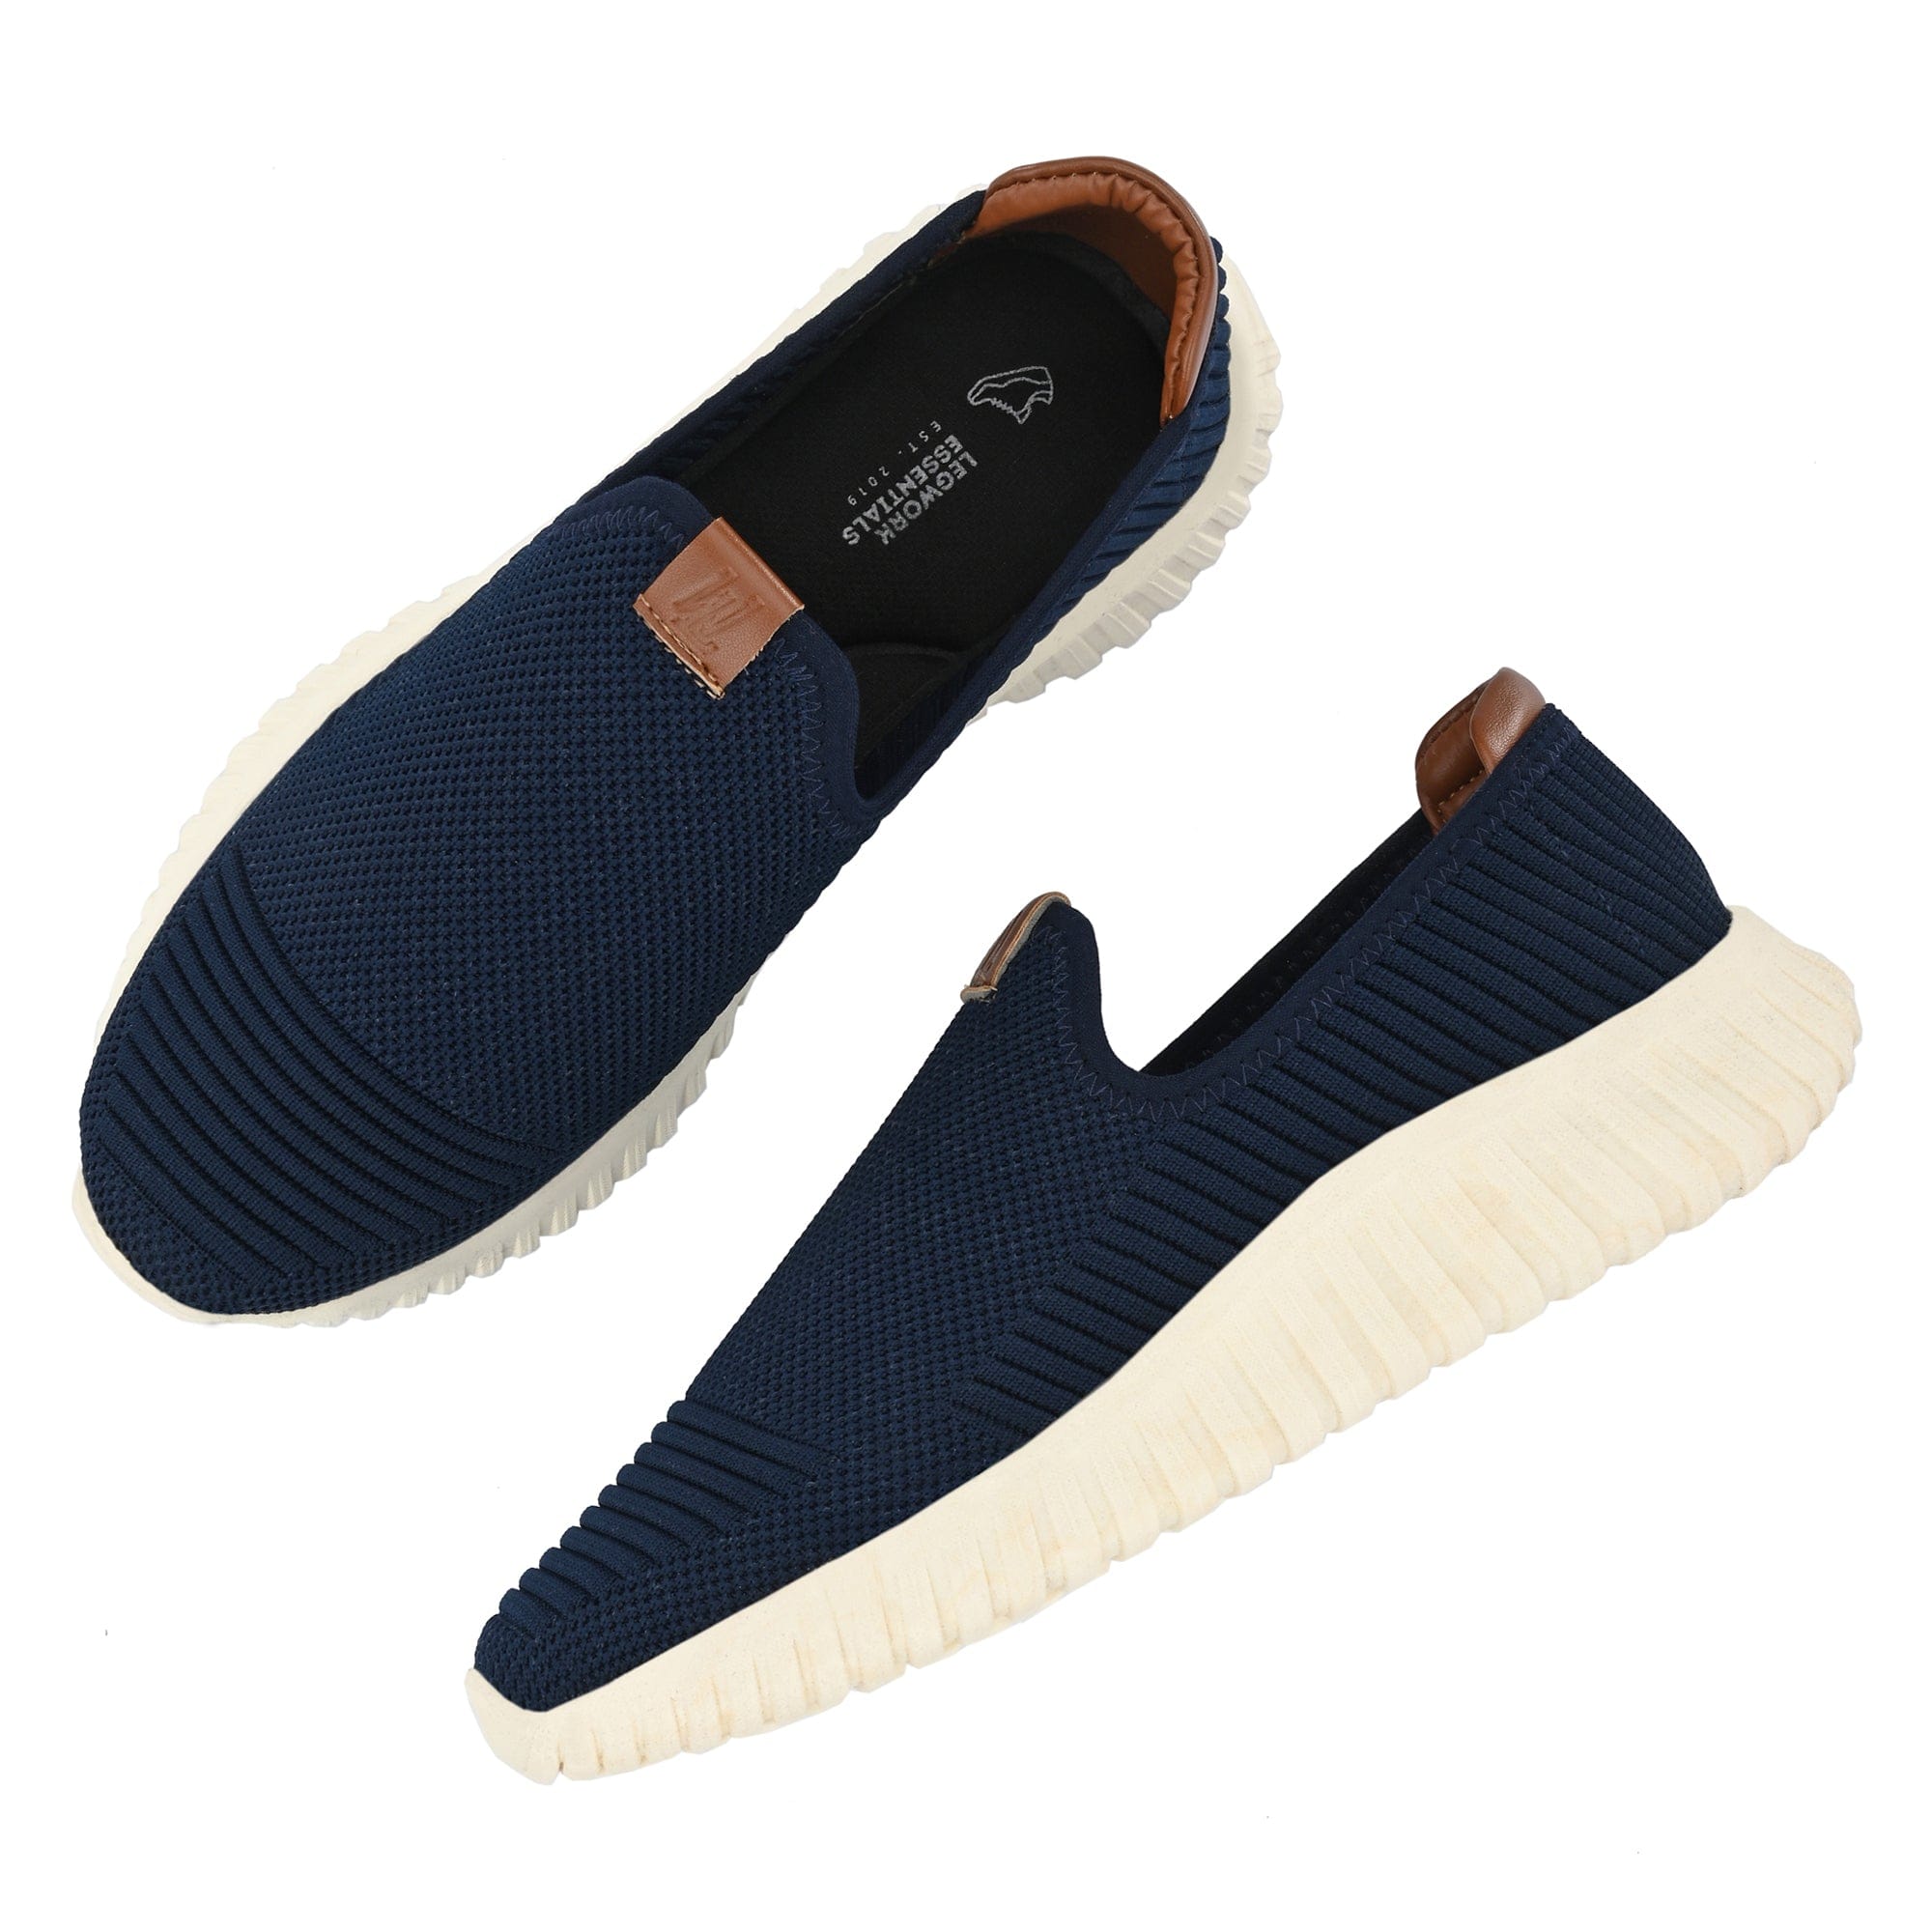 Legwork Drift Navy Comfortable ProKnit Sneakers Shoes made with 100% Recycled Plastic Bottles